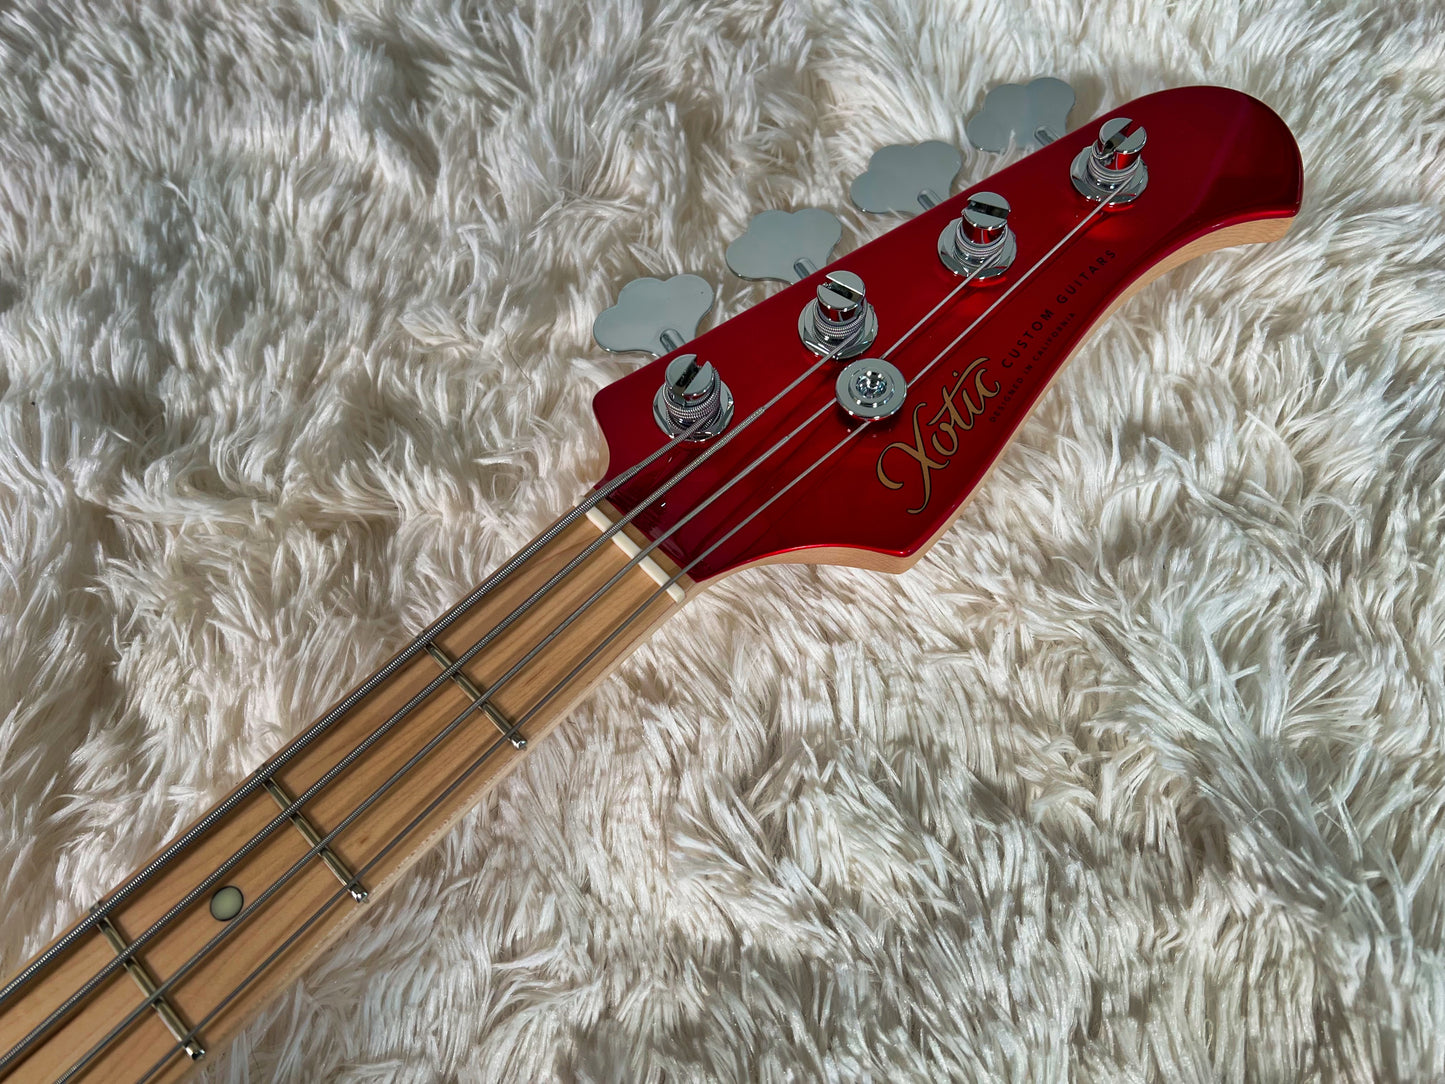 Xotic XJ - Candy Apple Red